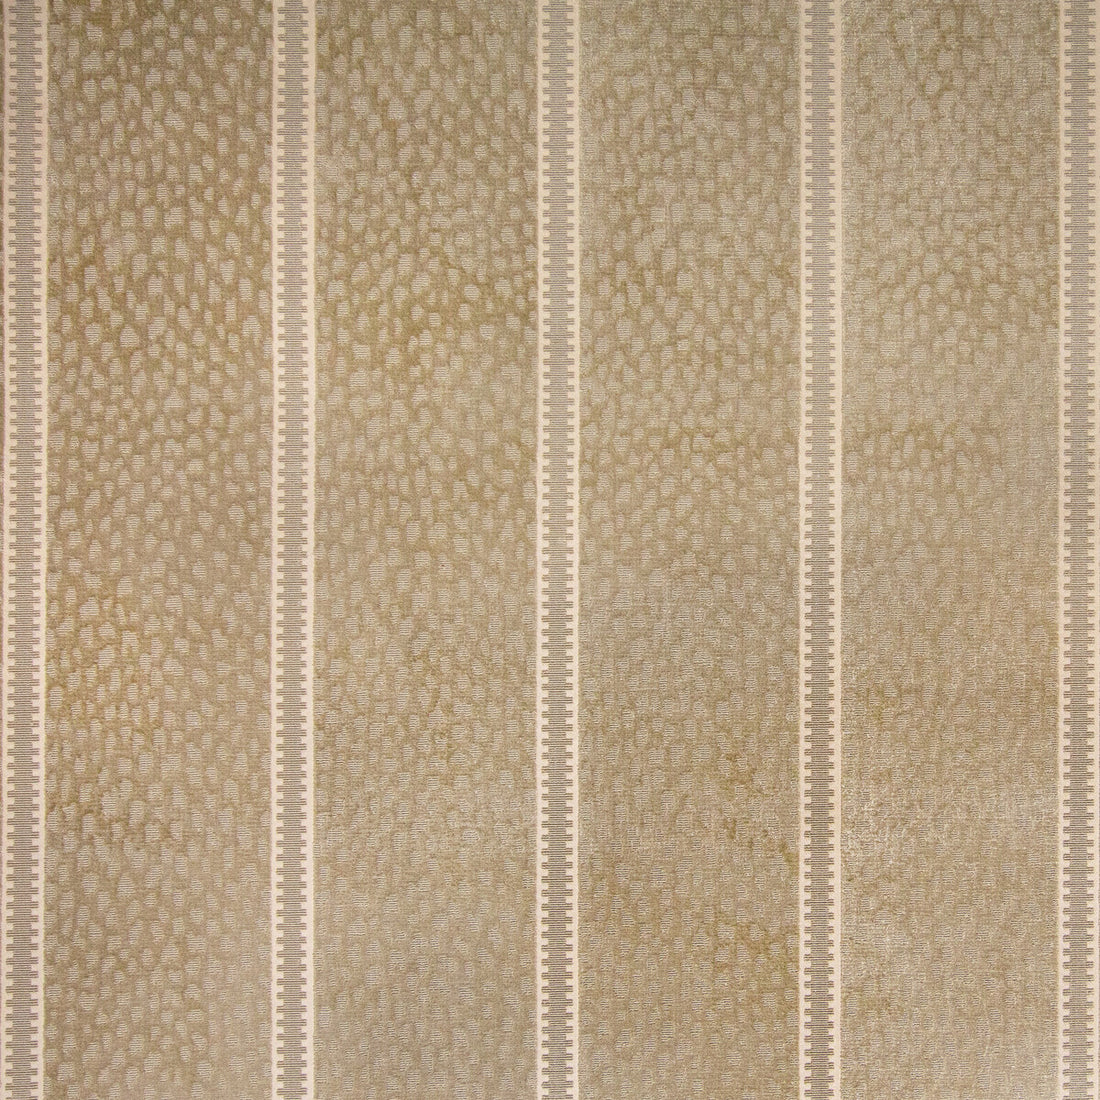 Salvator Velvet fabric in beige color - pattern 8019108.16.0 - by Brunschwig &amp; Fils in the Folio Francais collection